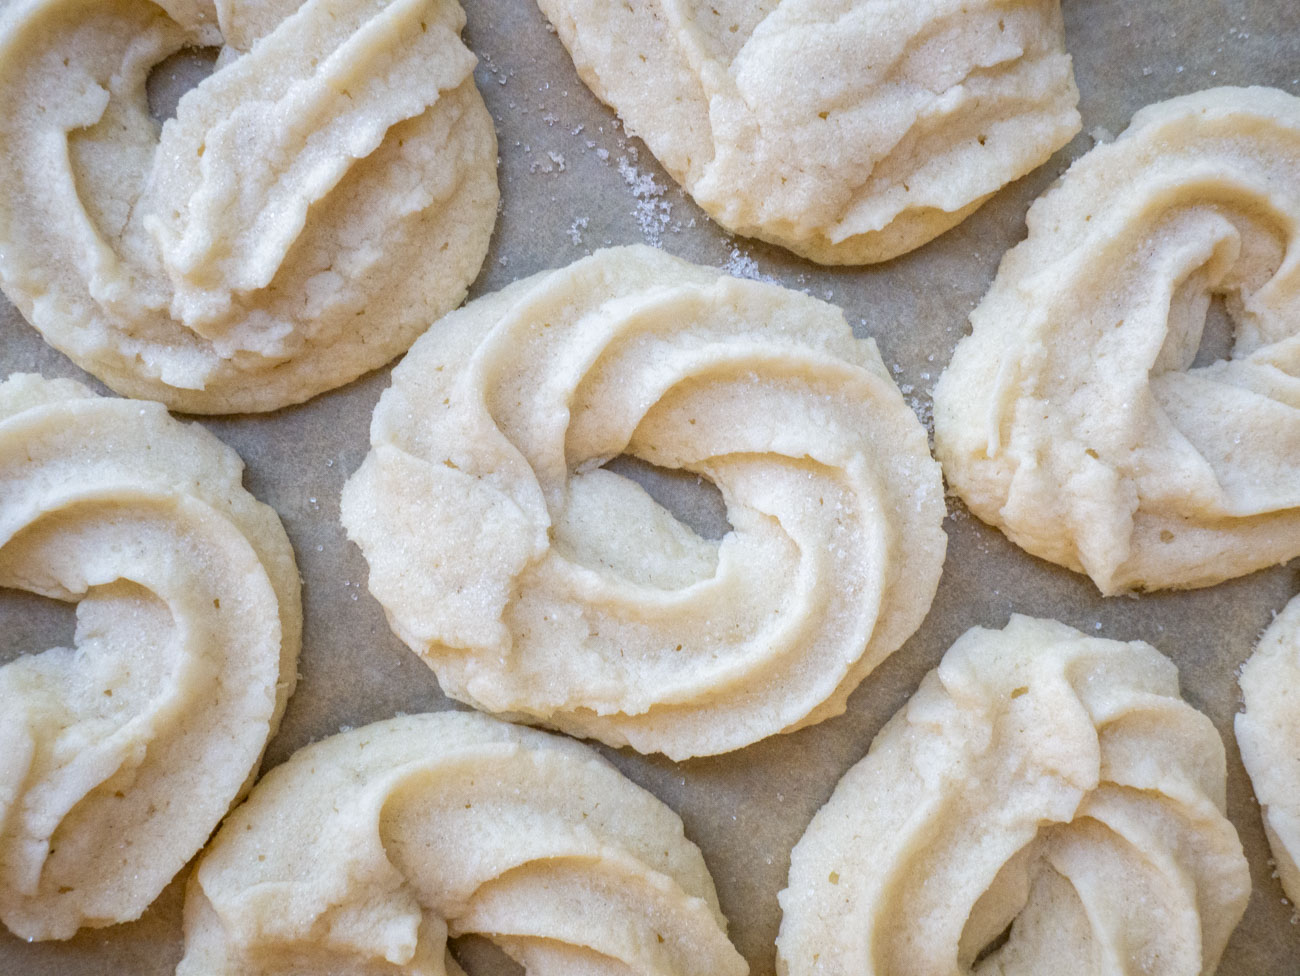 This butter cookie recipe tastes just like the Danish cookies in